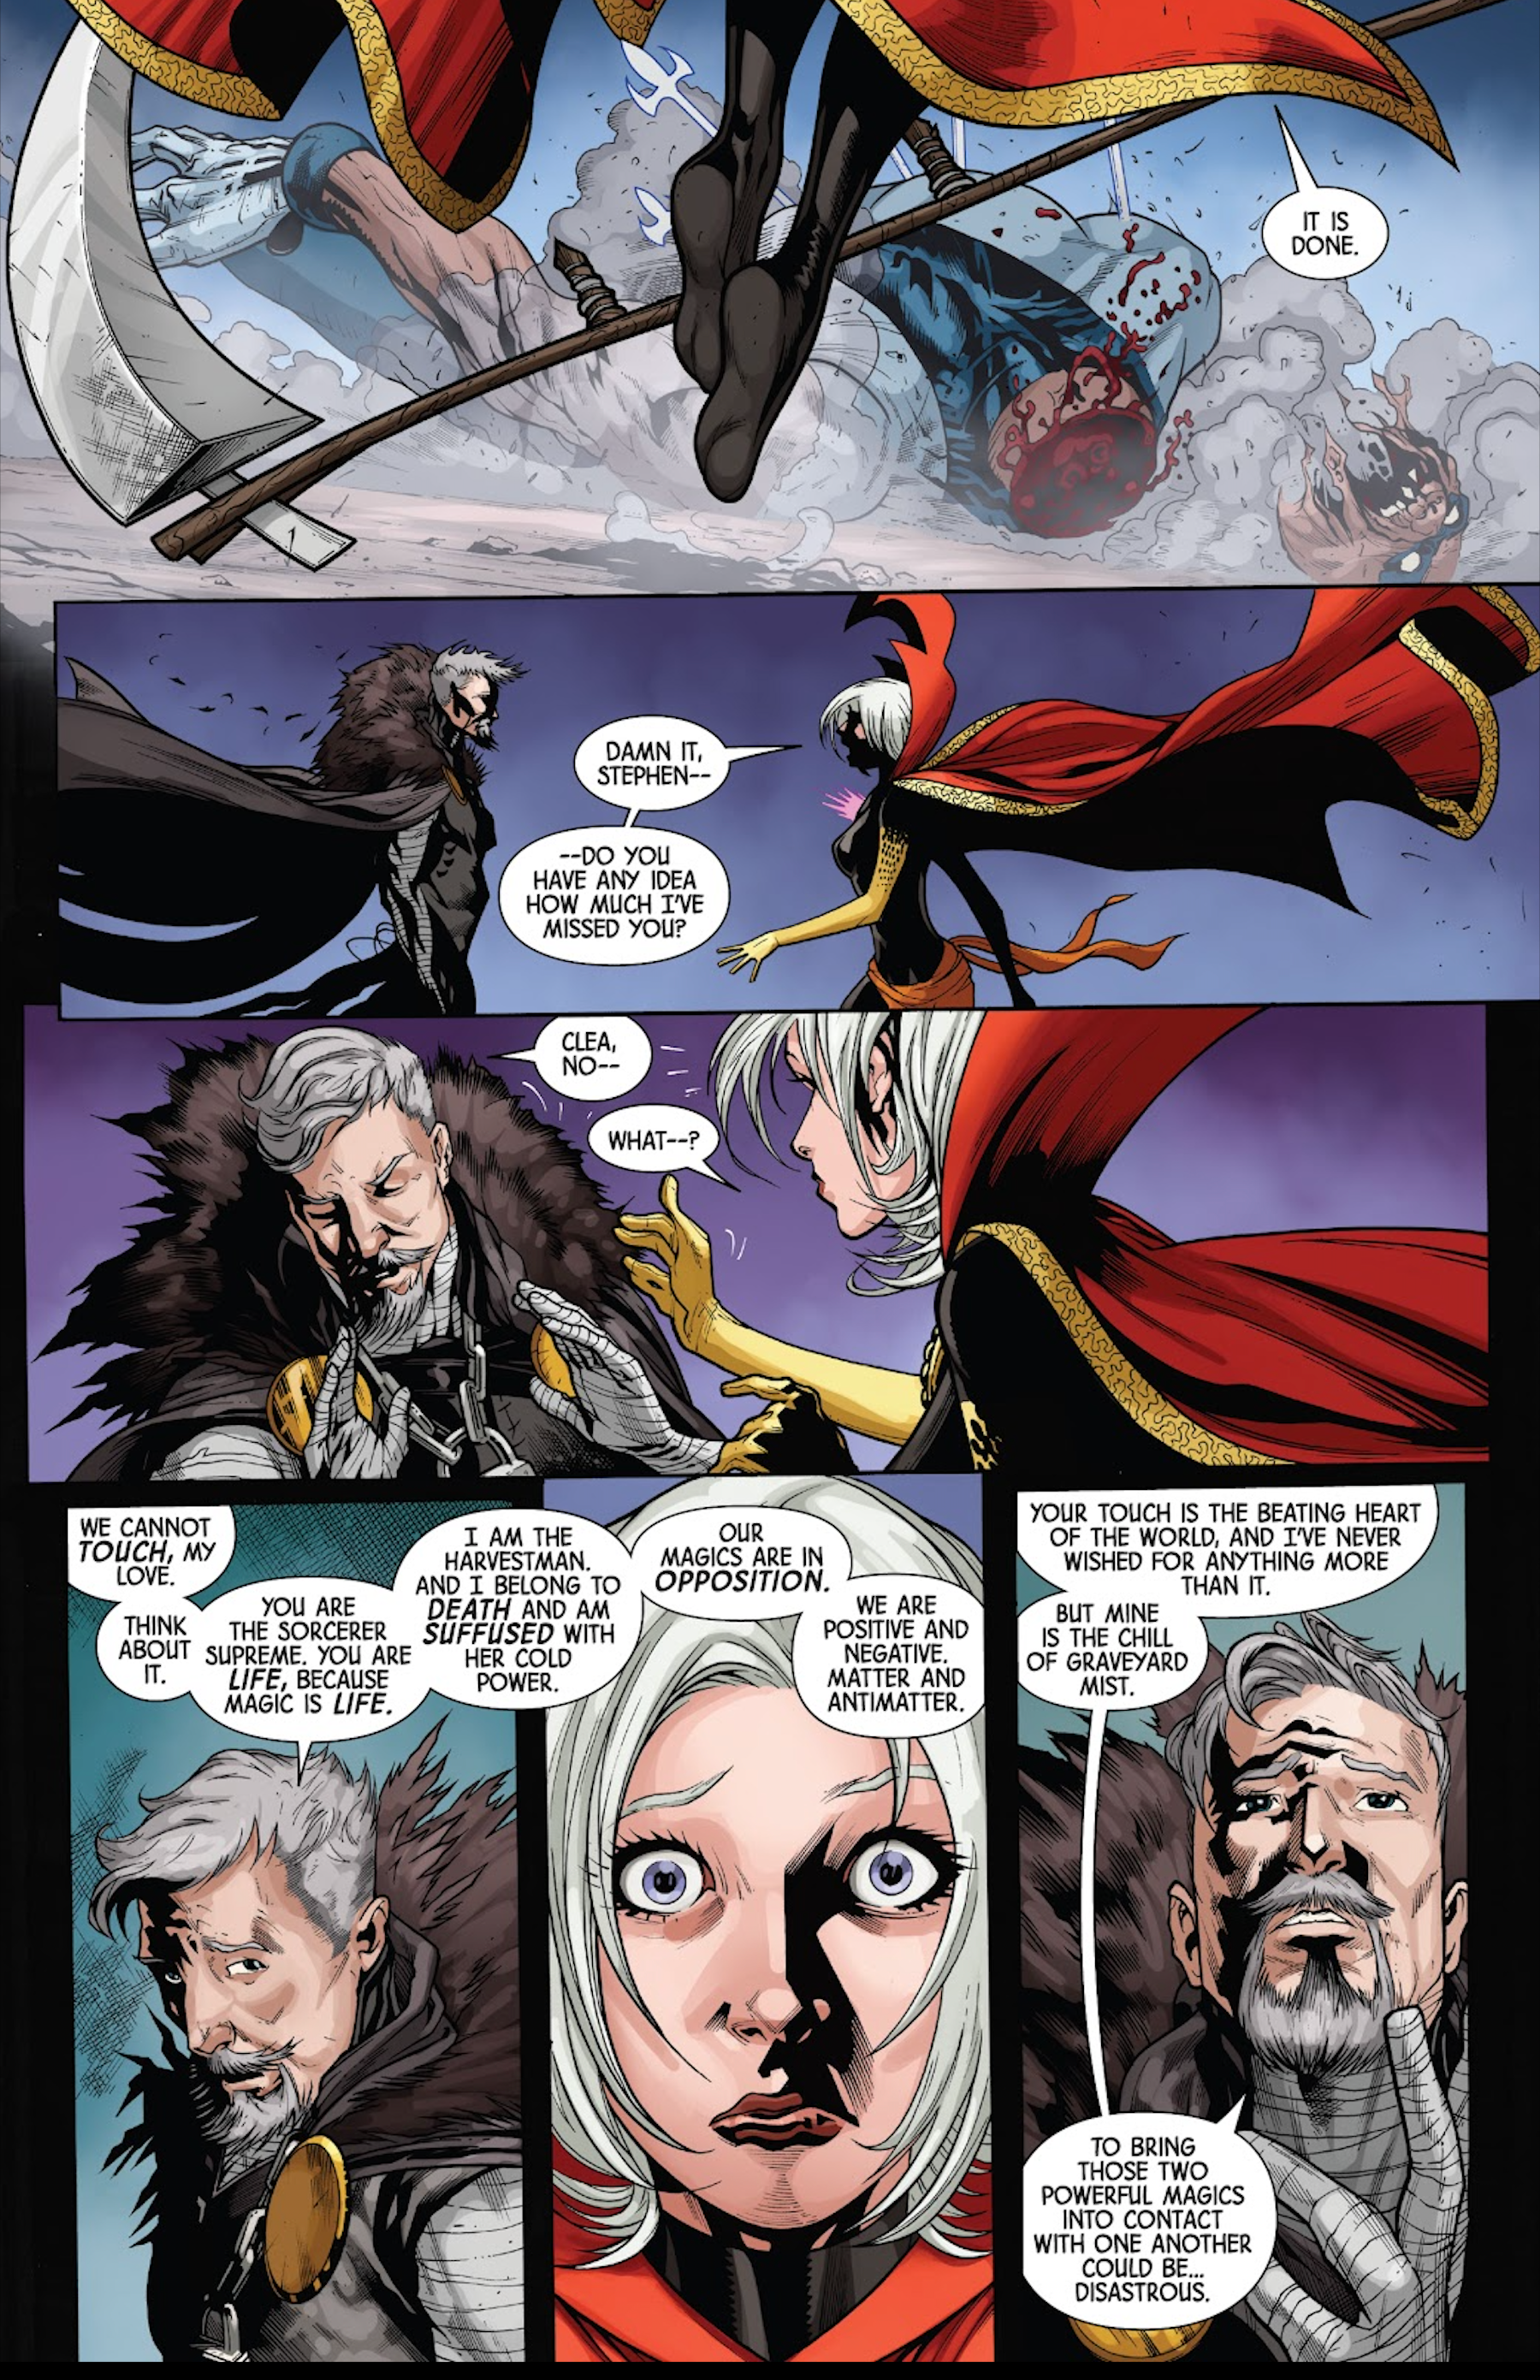 Clea meets Doctor Strange after his death